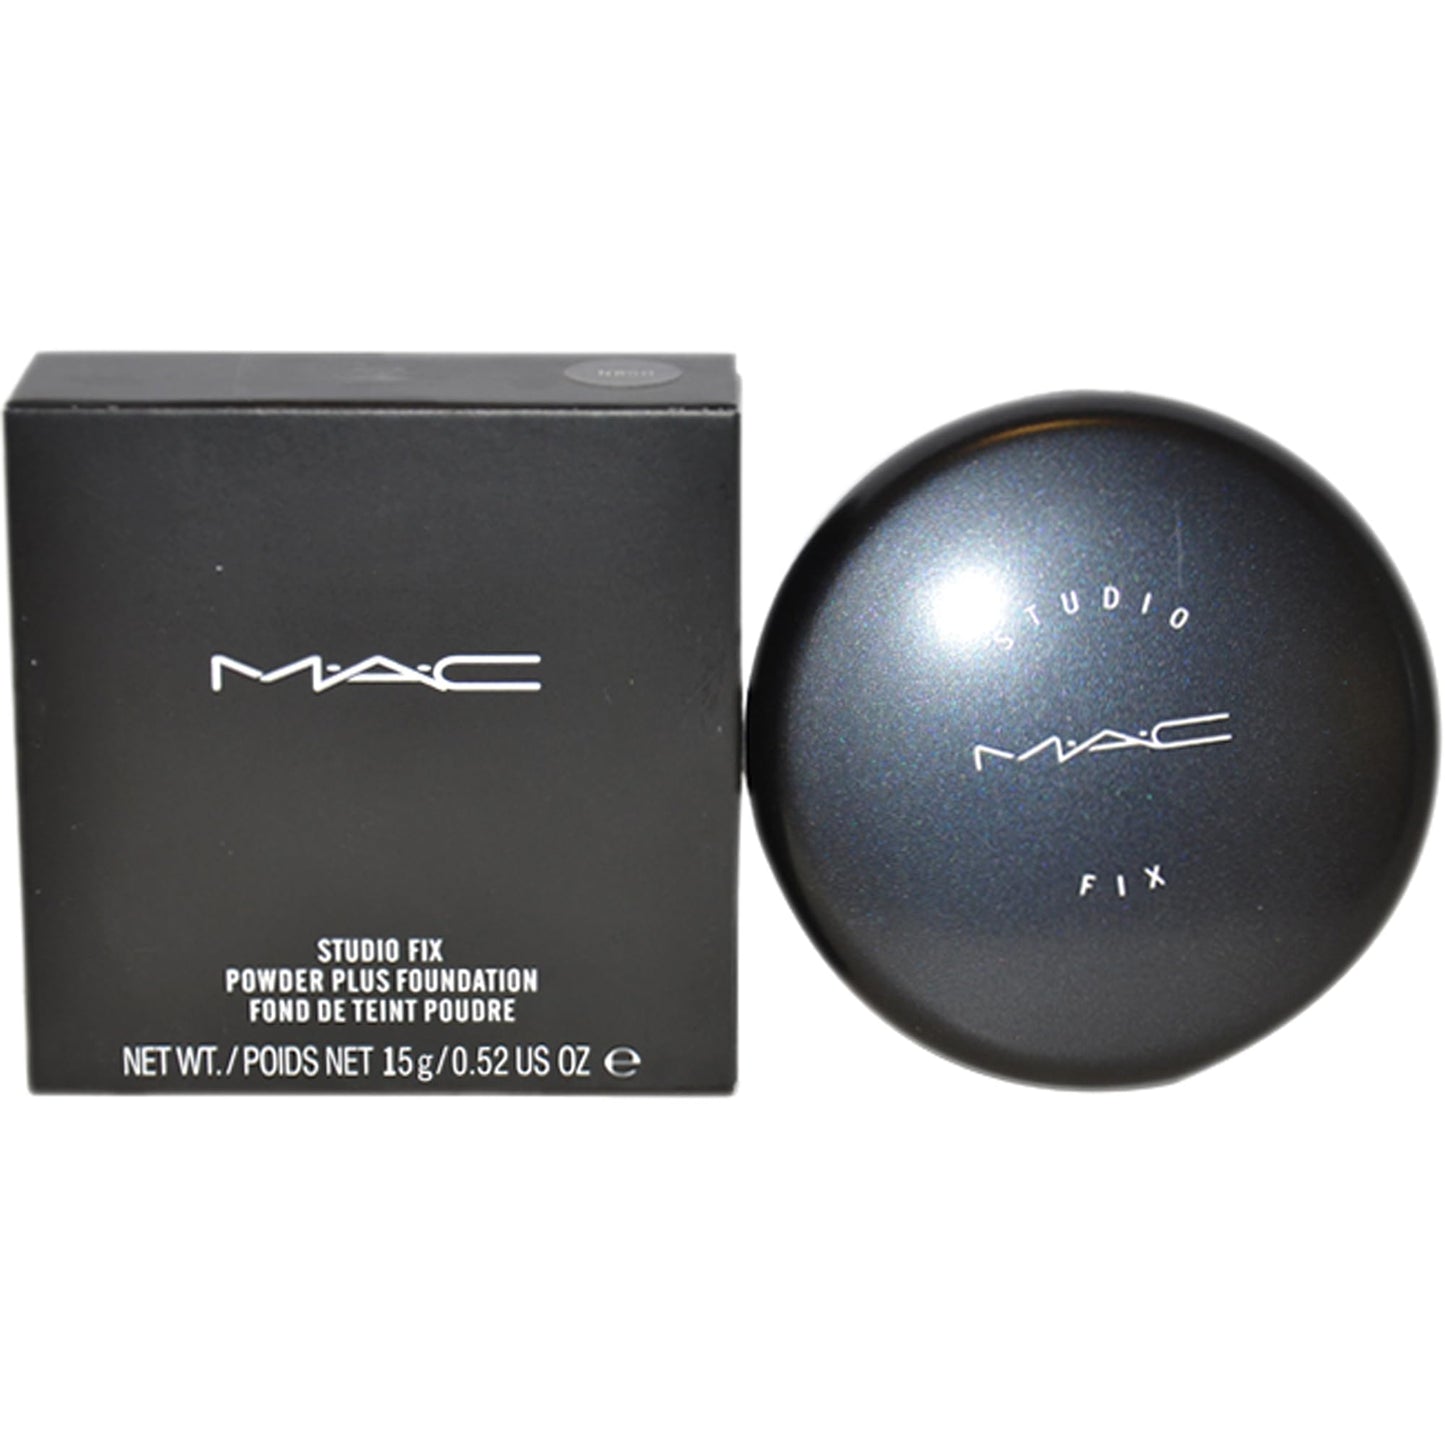 M.A.C Studio Fix Powder Plus Natural, Sheer Finish Foundation, NC43, 15g/0.52oz  from M.A.C